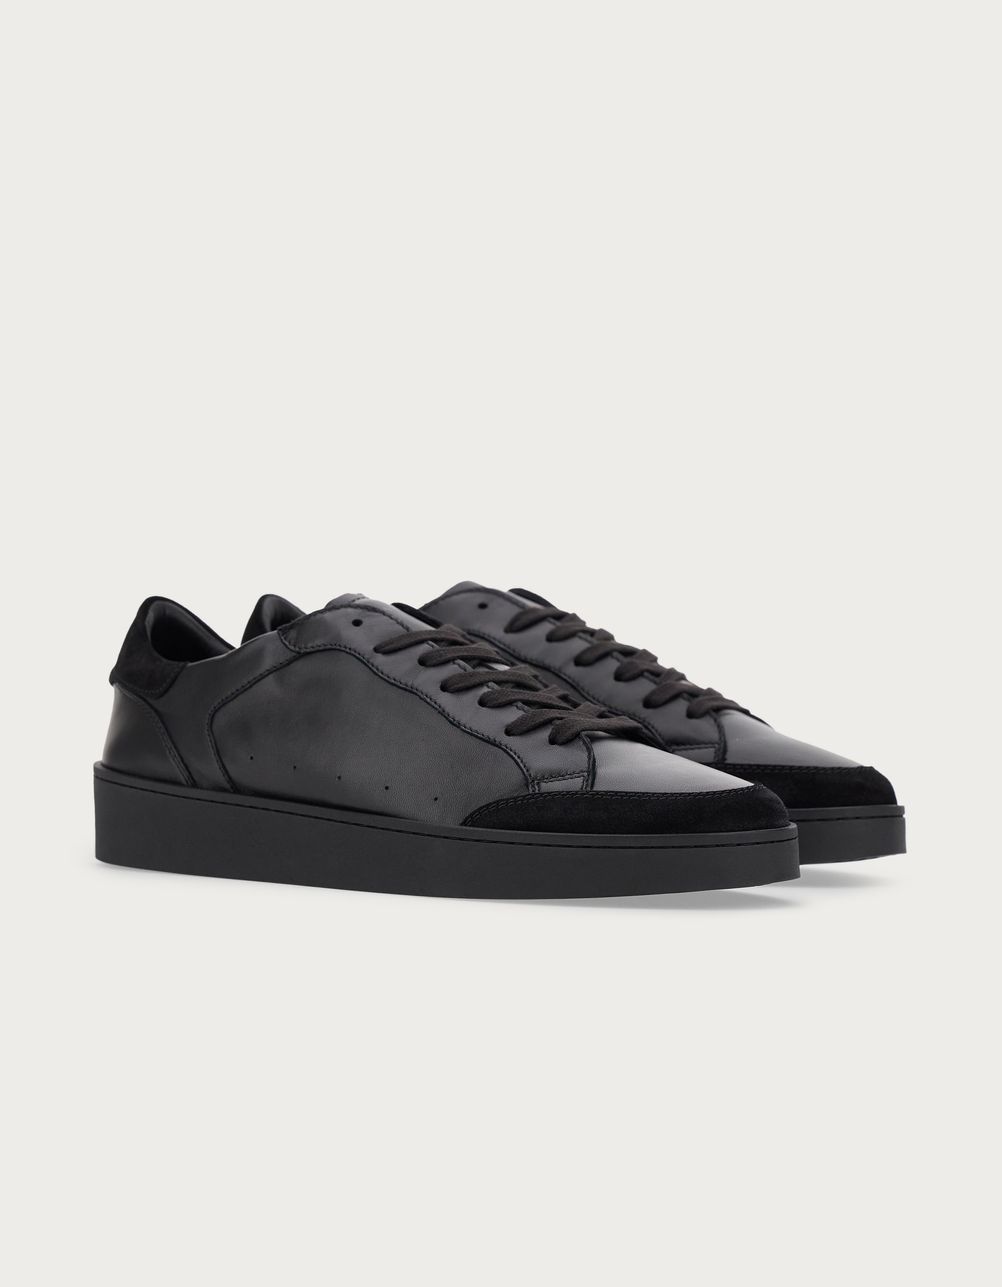 Black leather and suede trainers